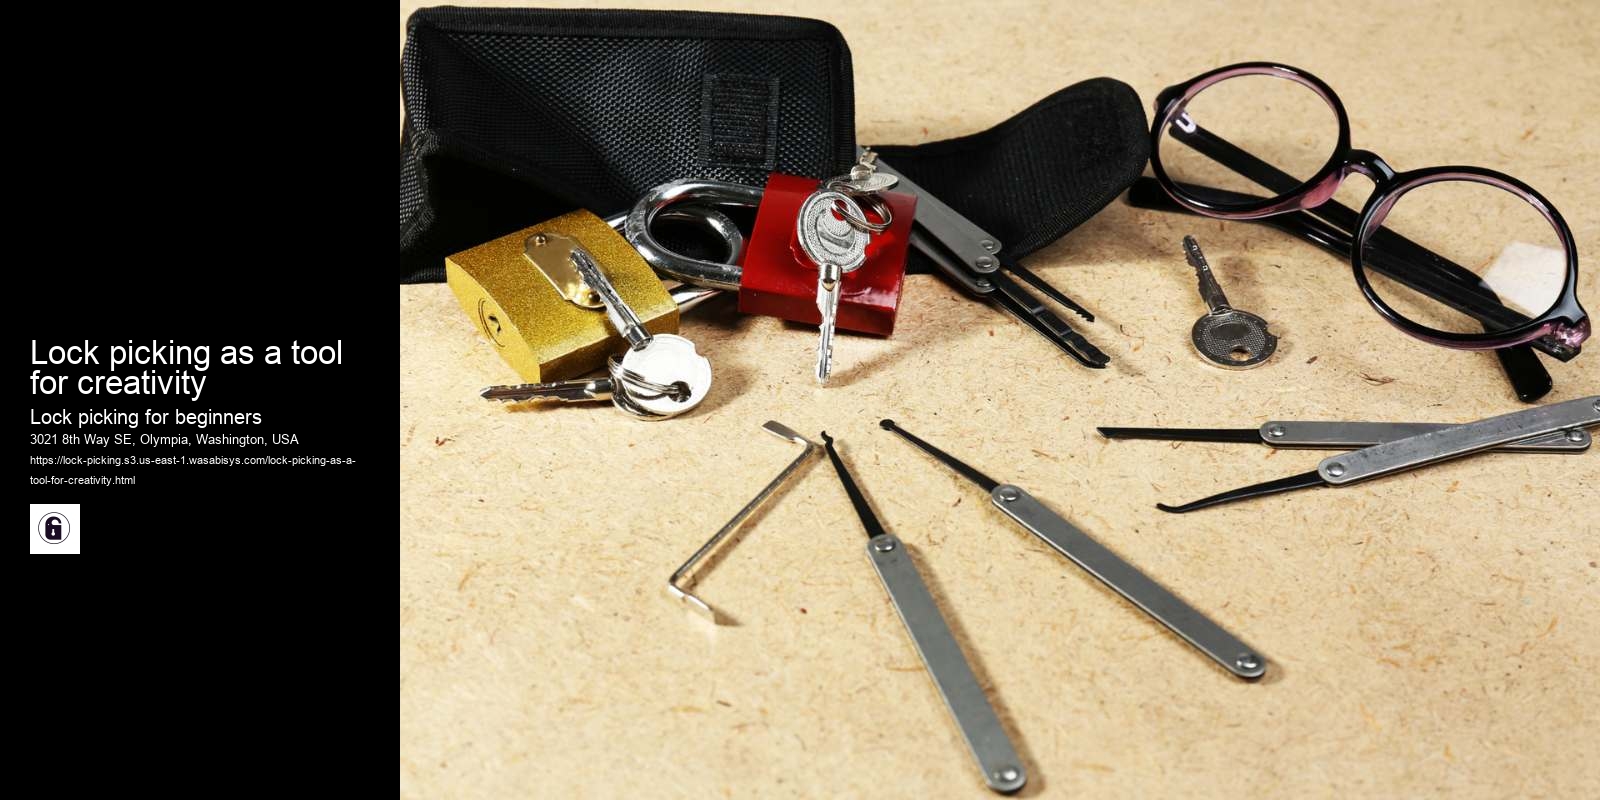 Lock picking as a tool for creativity